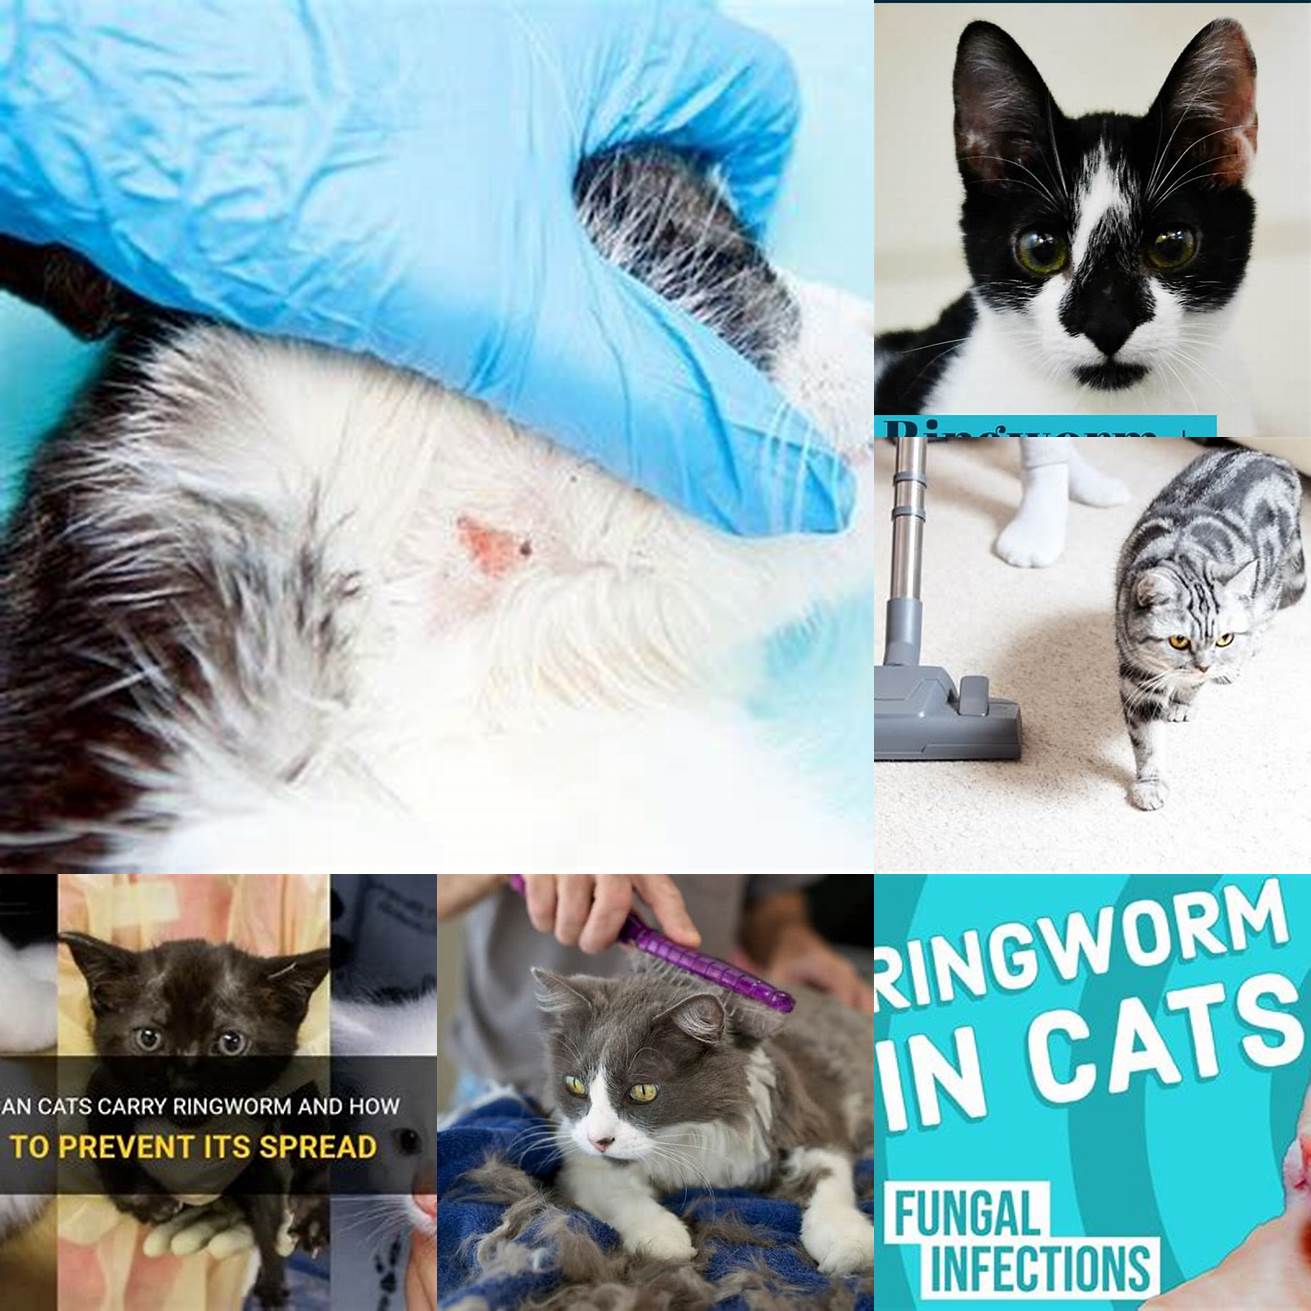 Clean your cats bedding regularly to prevent the spread of ringworm